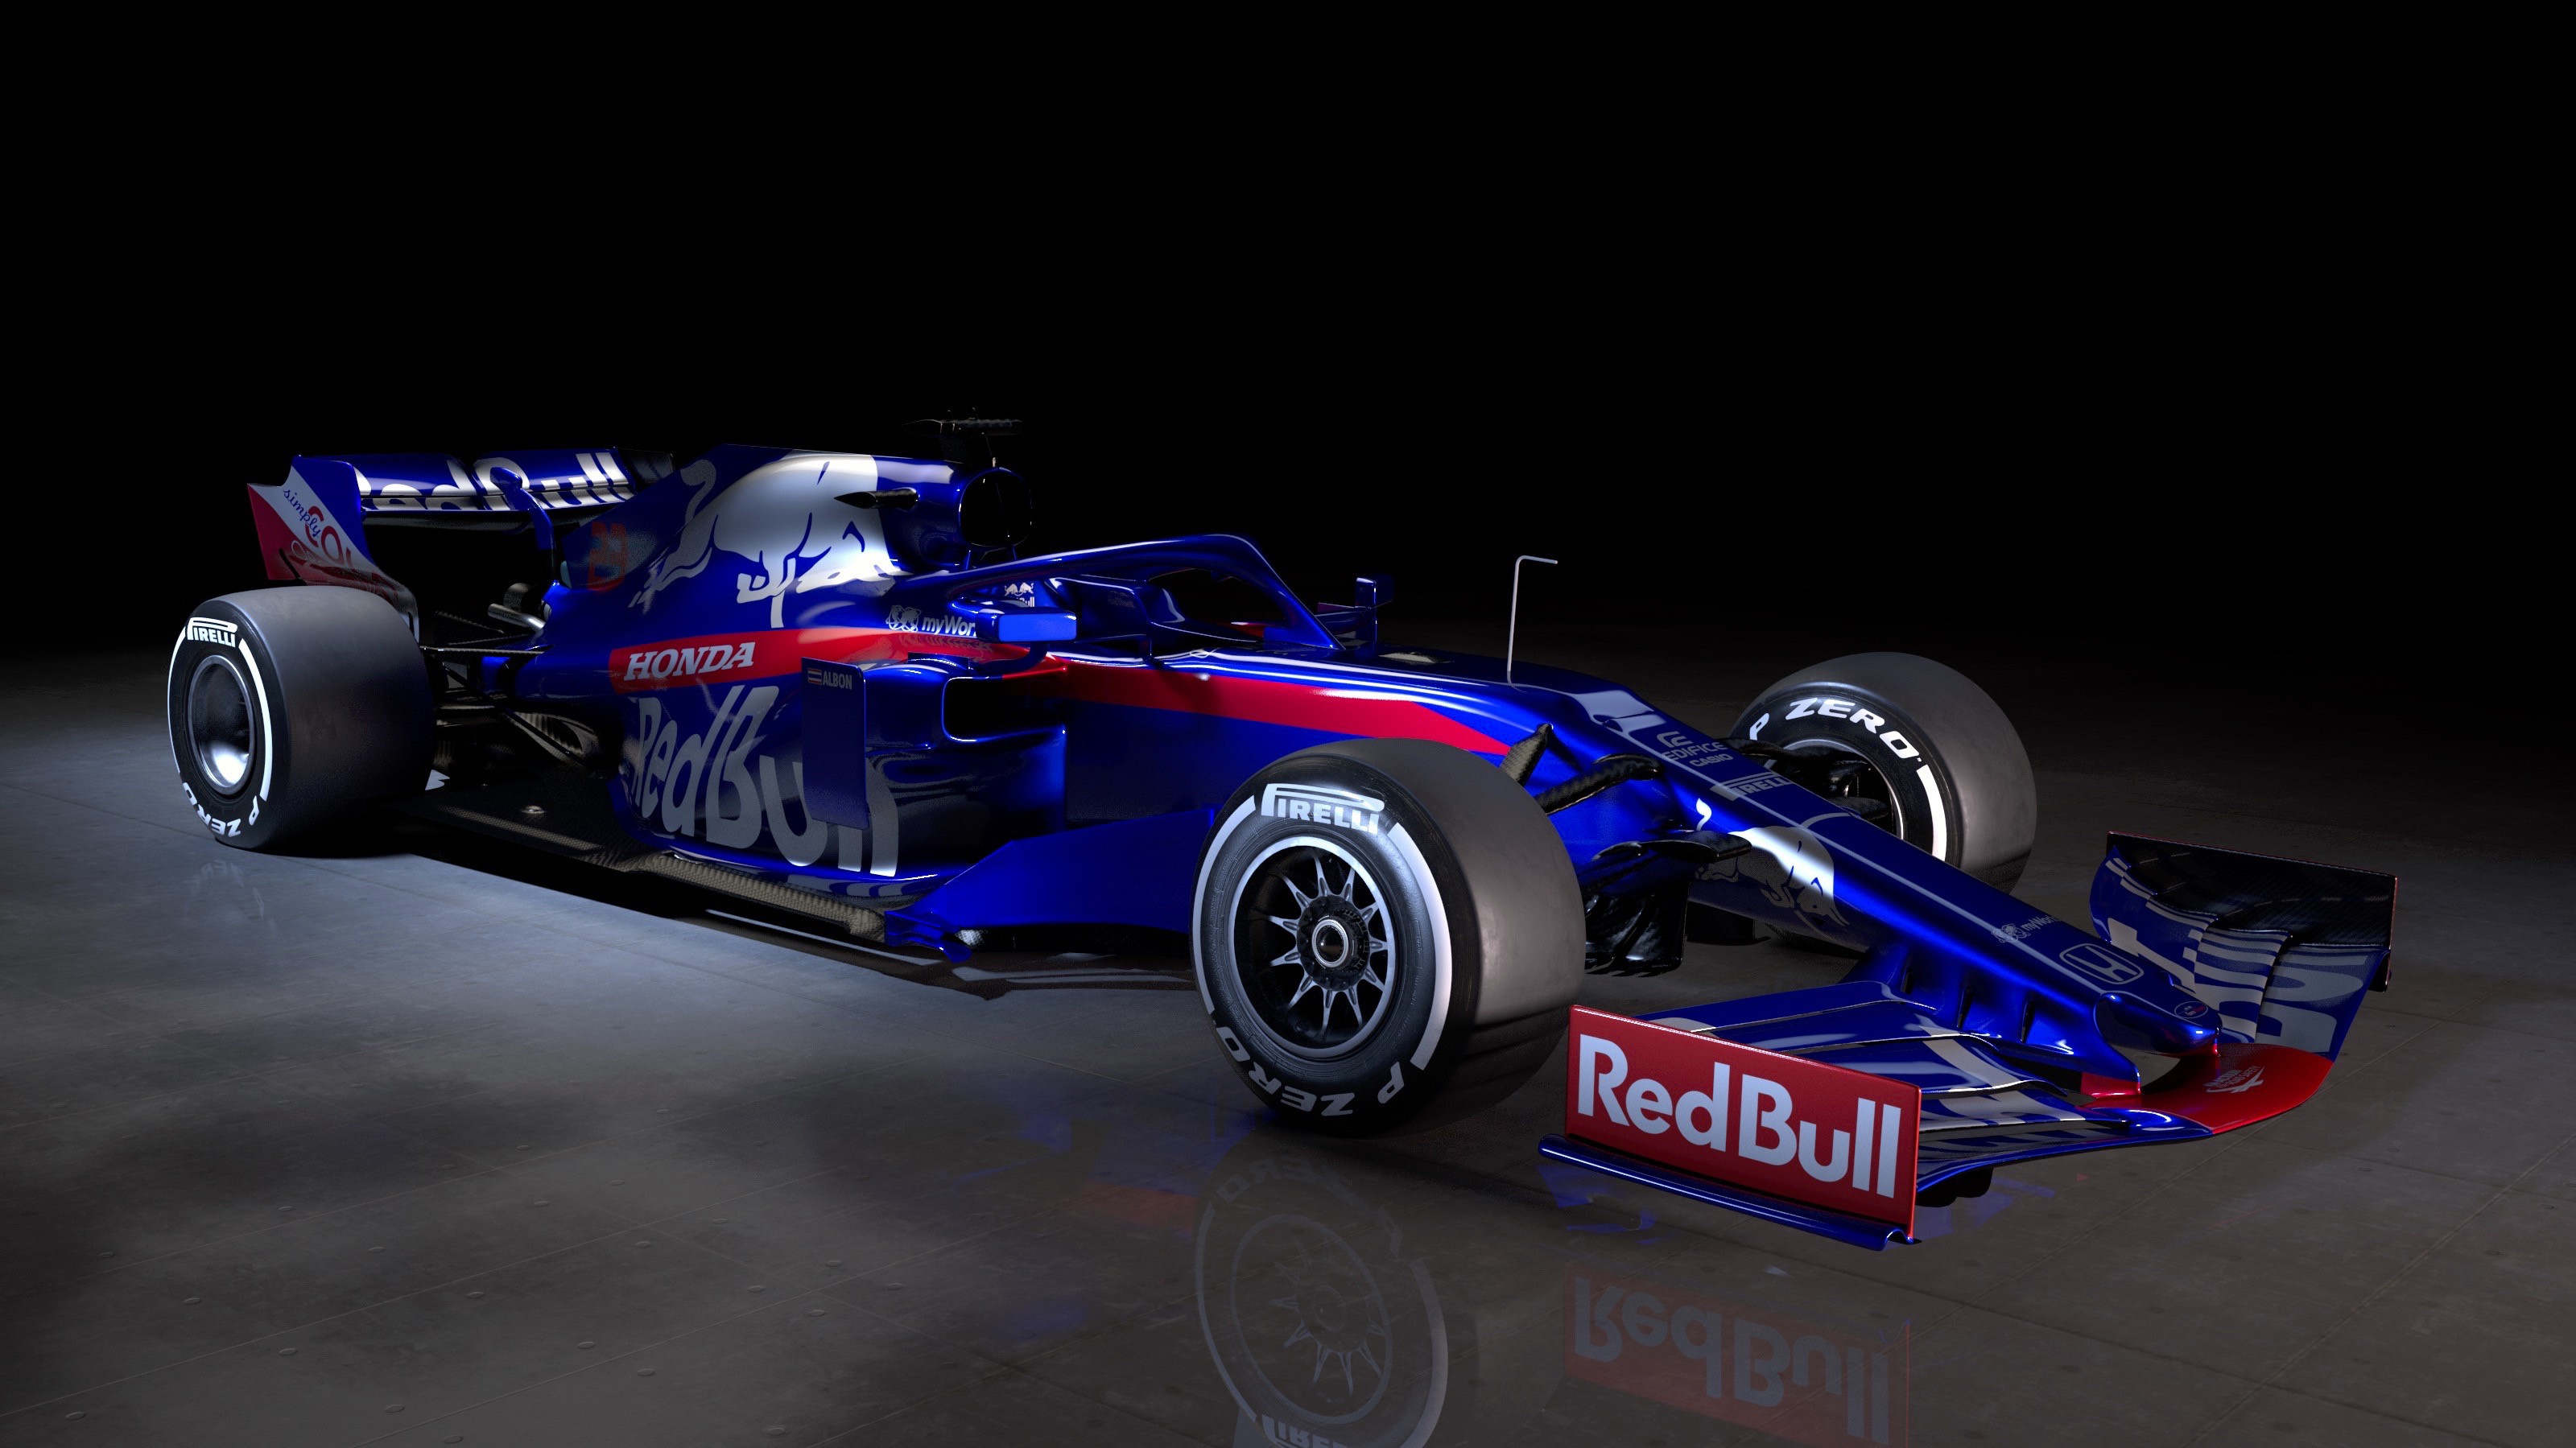 General 3200x1799 Formula 1 car race cars vehicle racing blue cars 2019 (year) simple background reflection sport livery